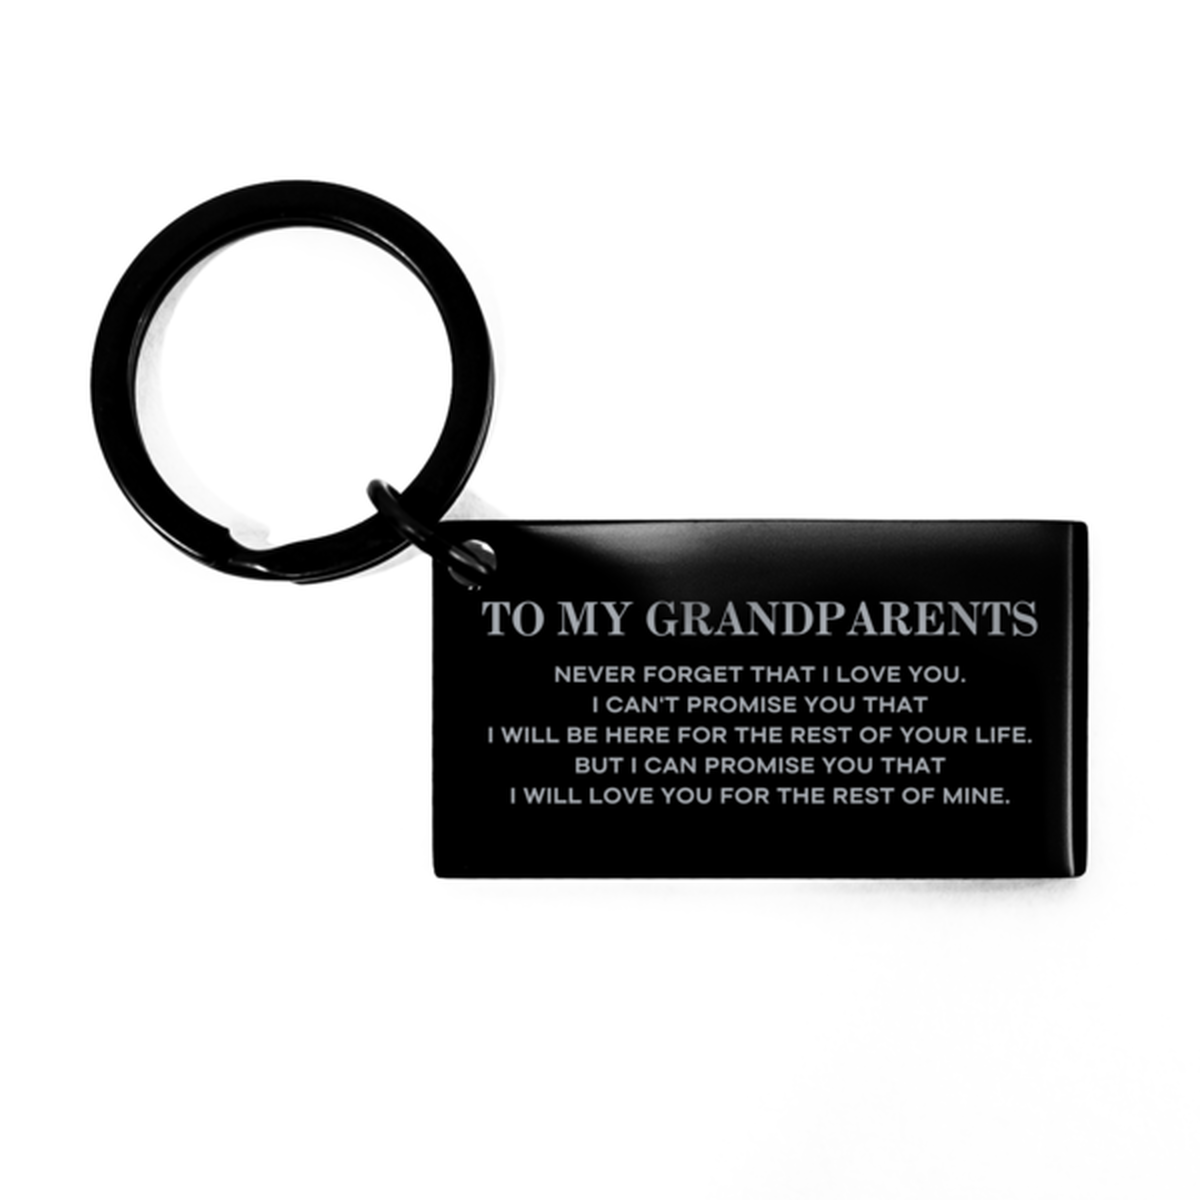 To My Grandparents Gifts, I will love you for the rest of mine, Love Grandparents Keychain, Birthday Christmas Unique Keychain For Grandparents